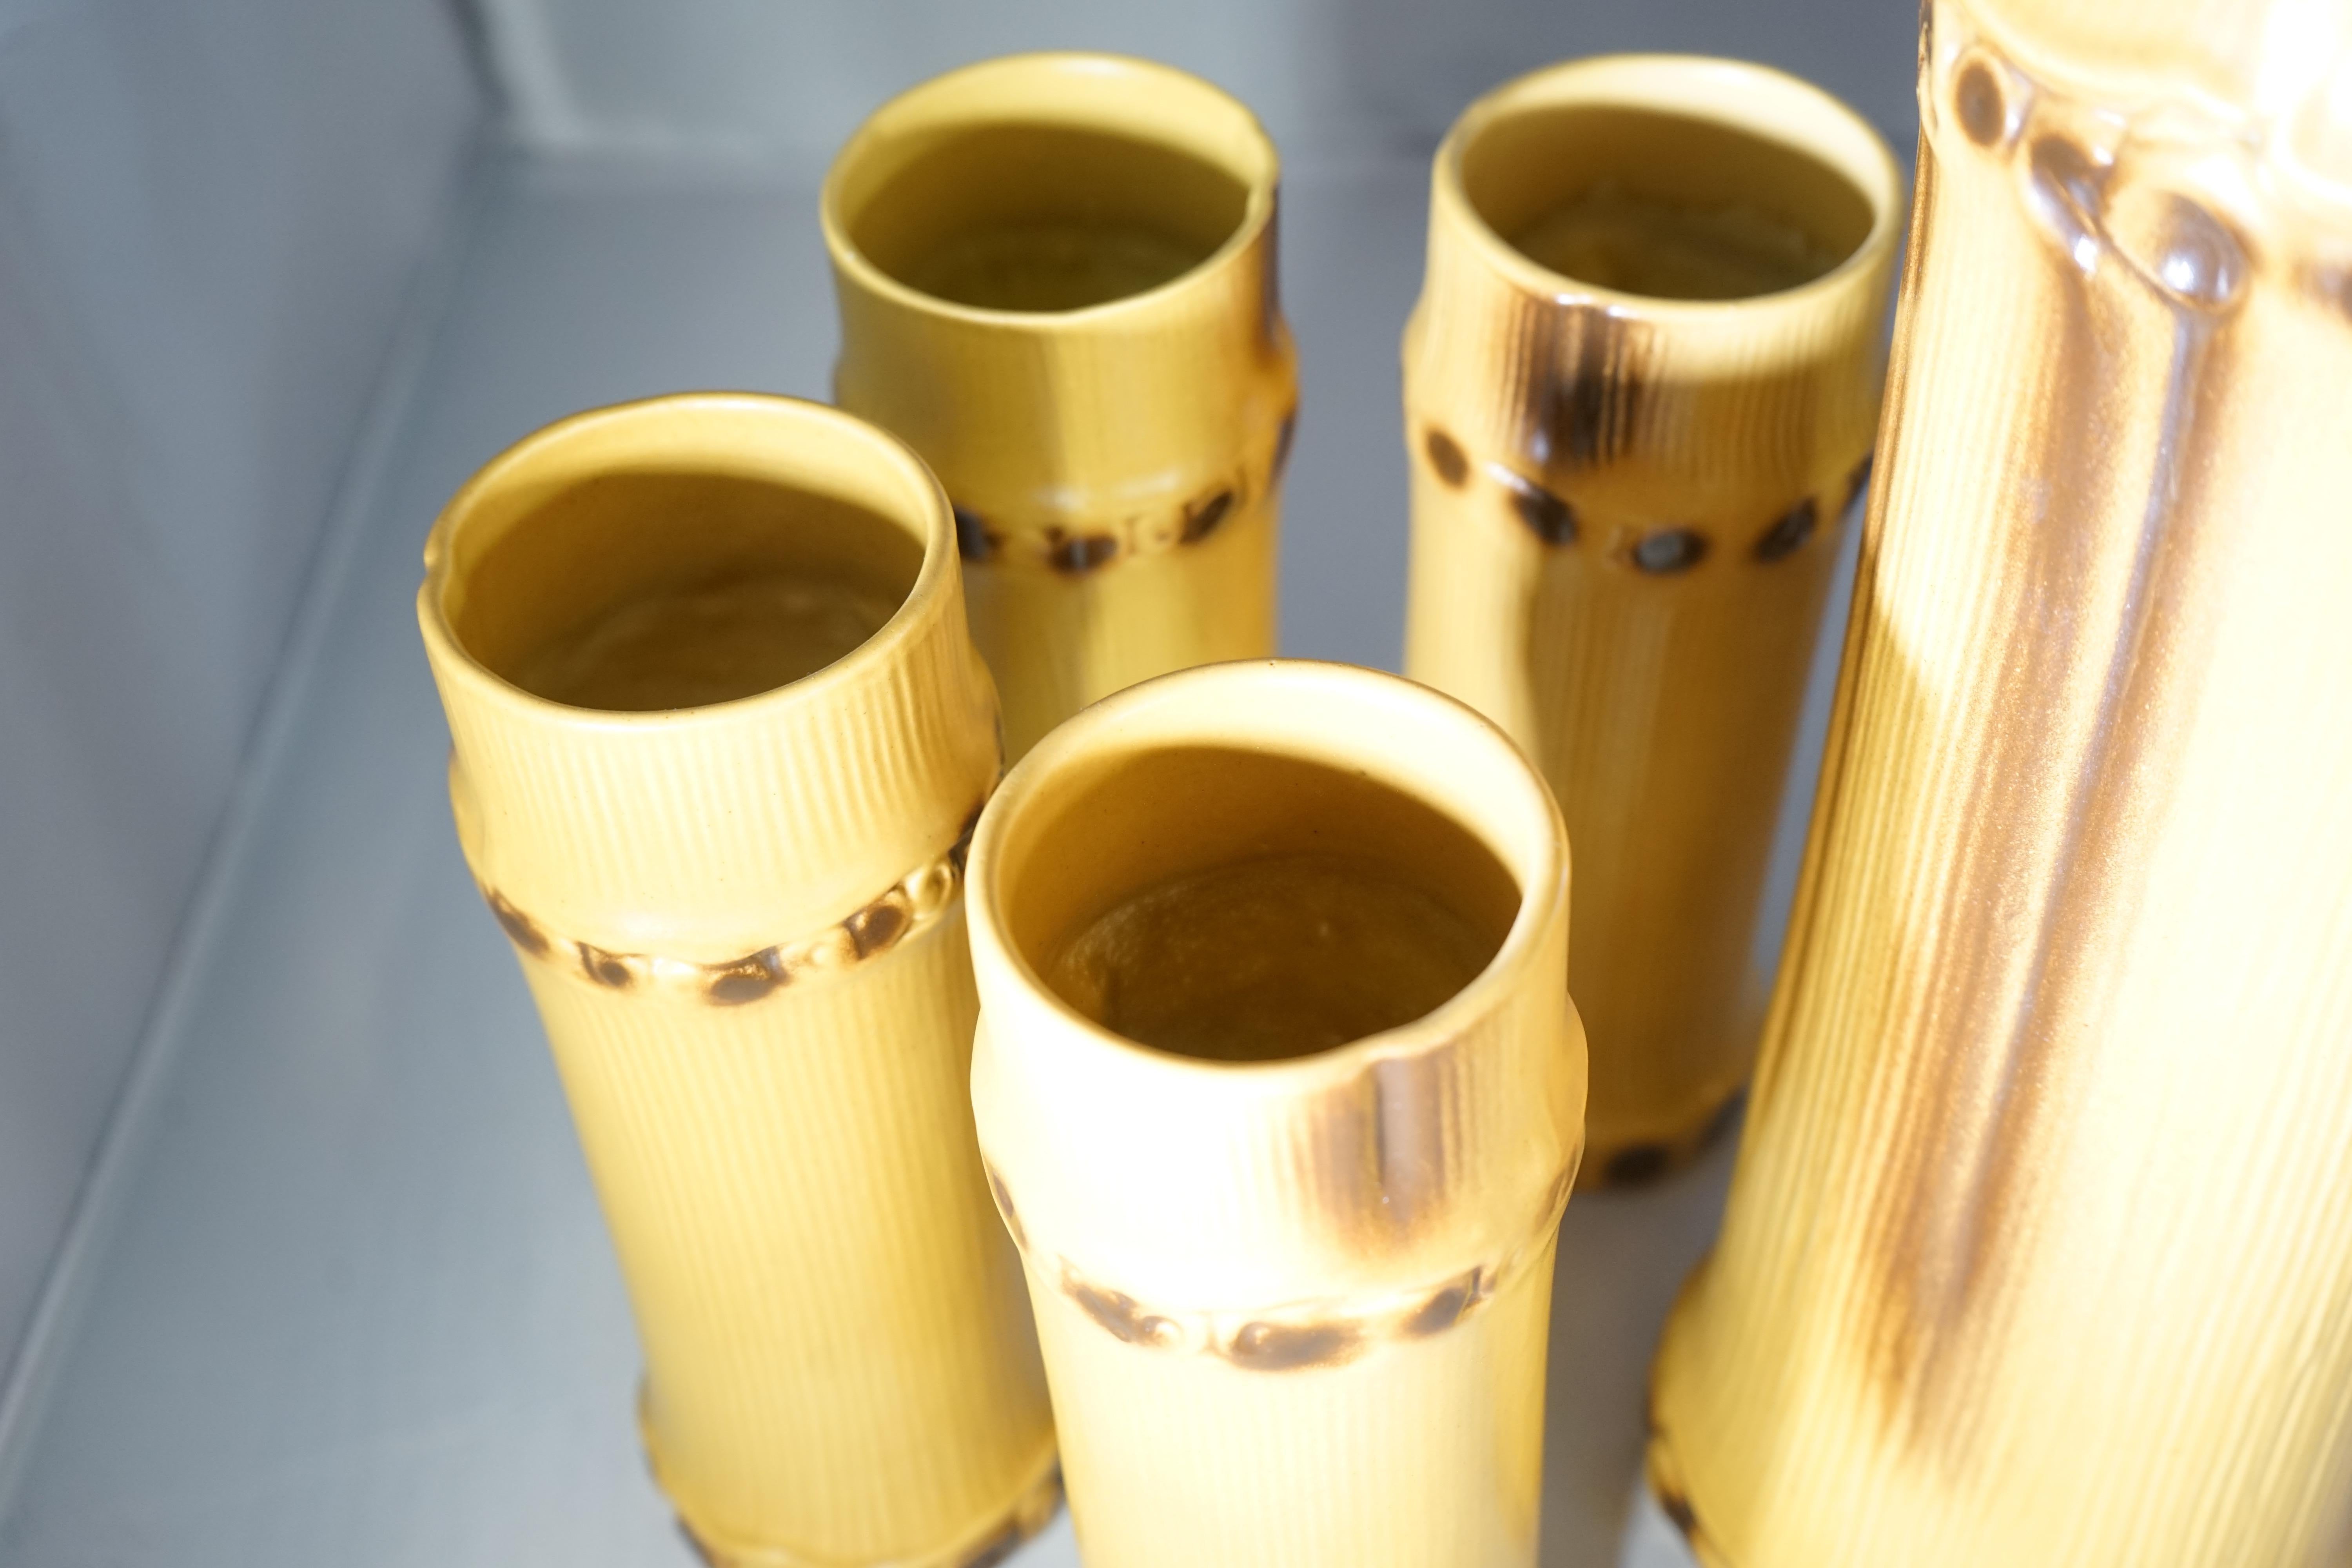 1950s ceramic faux bamboo serveware set by French artist Pol Chambost. Features a pitcher and 8 matching sand color faux bamboo glasses.